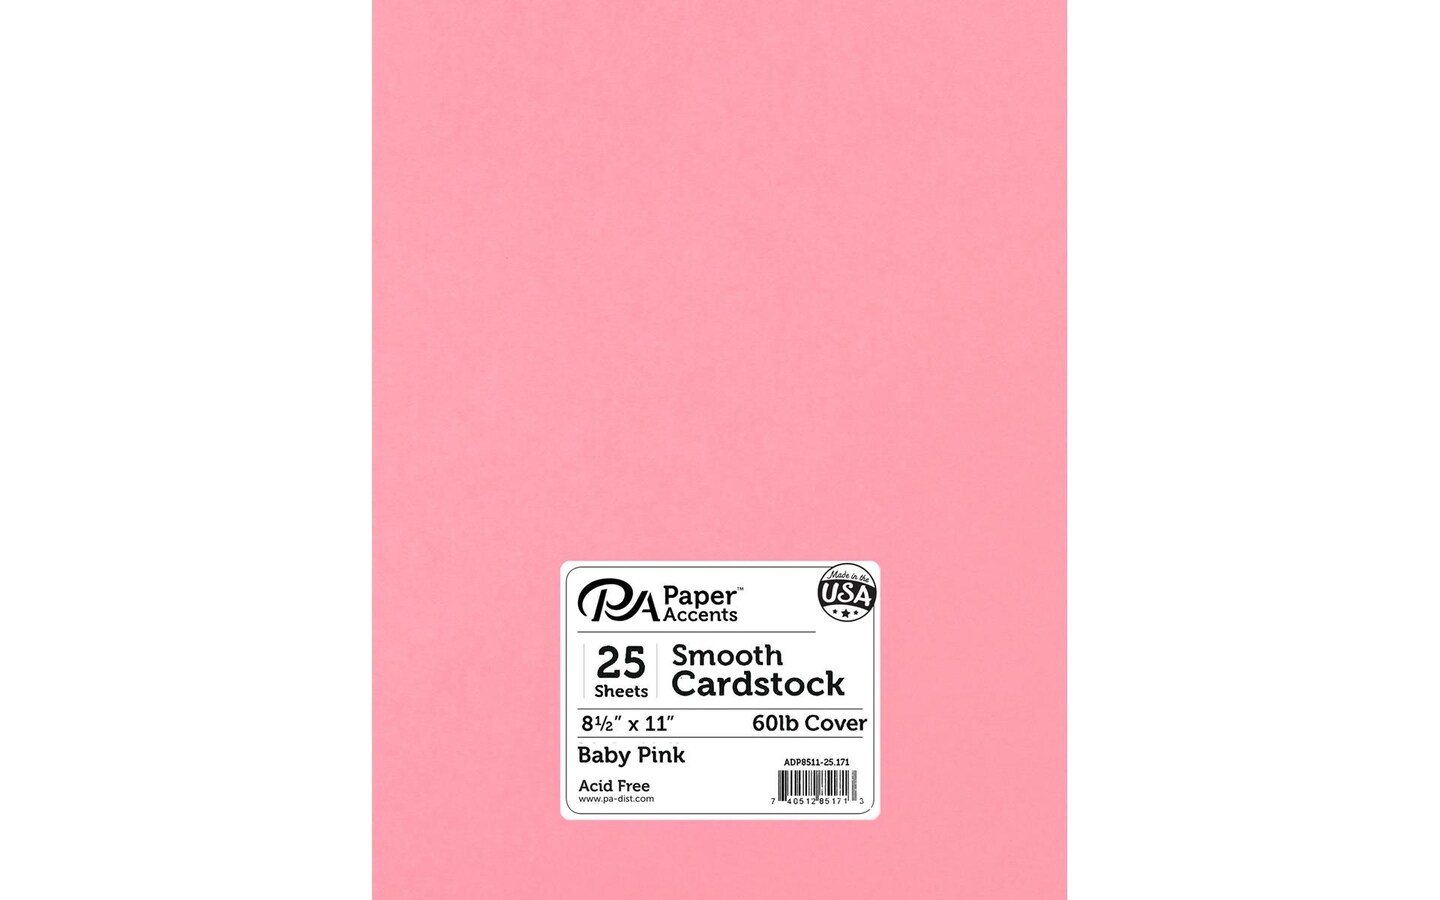 PA Paper Accents Smooth Cardstock 8.5 x 11 Light Pink, 60lb colored  cardstock paper for card making, scrapbooking, printing, quilling and  crafts, 25